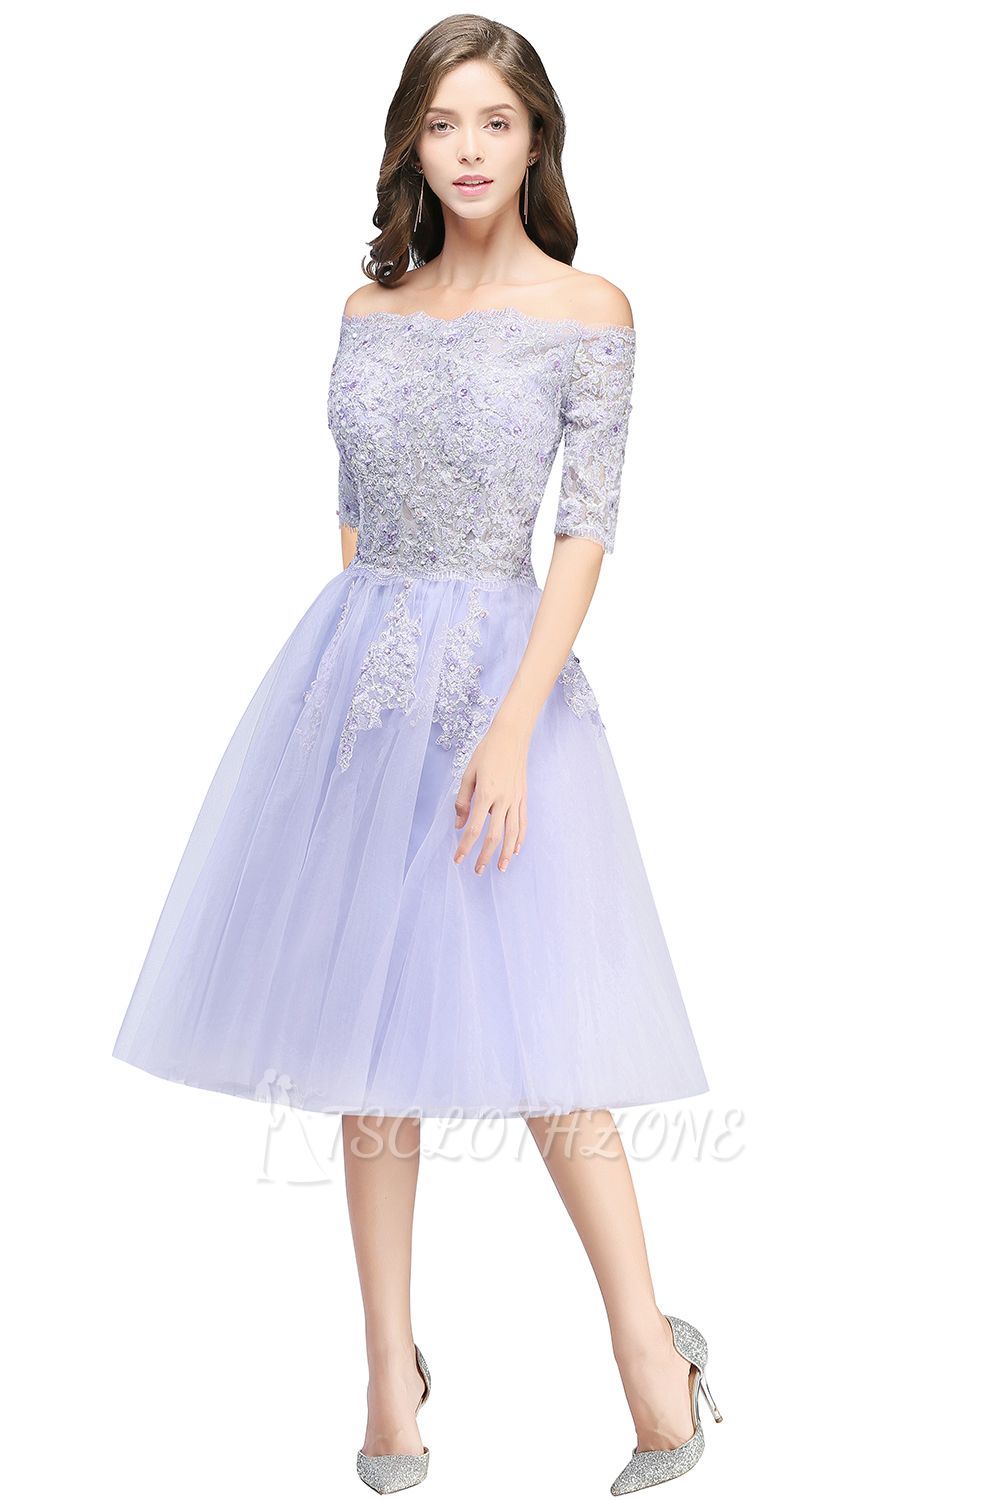 A-line applique tulle ball gown